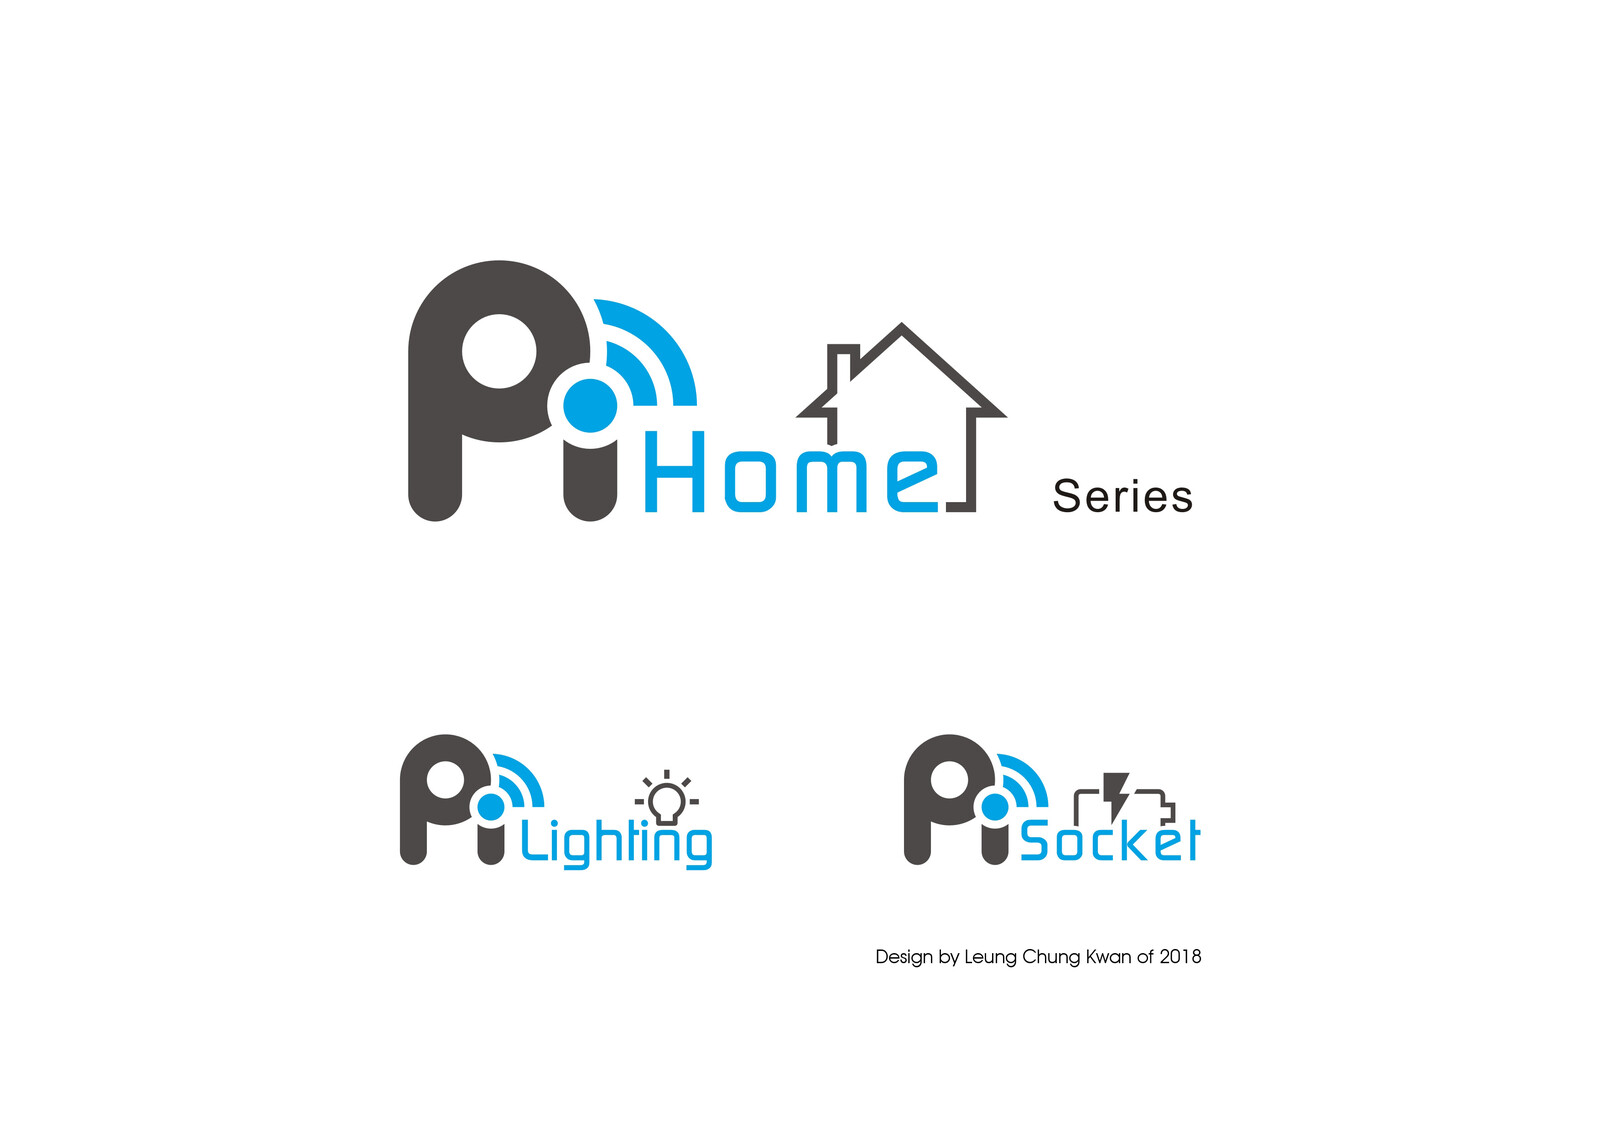 💎 Product Logo | Design by Leung Chung Kwan on 2018 💎
App Name︰Pihome Series | Client︰Piot Technology Limited